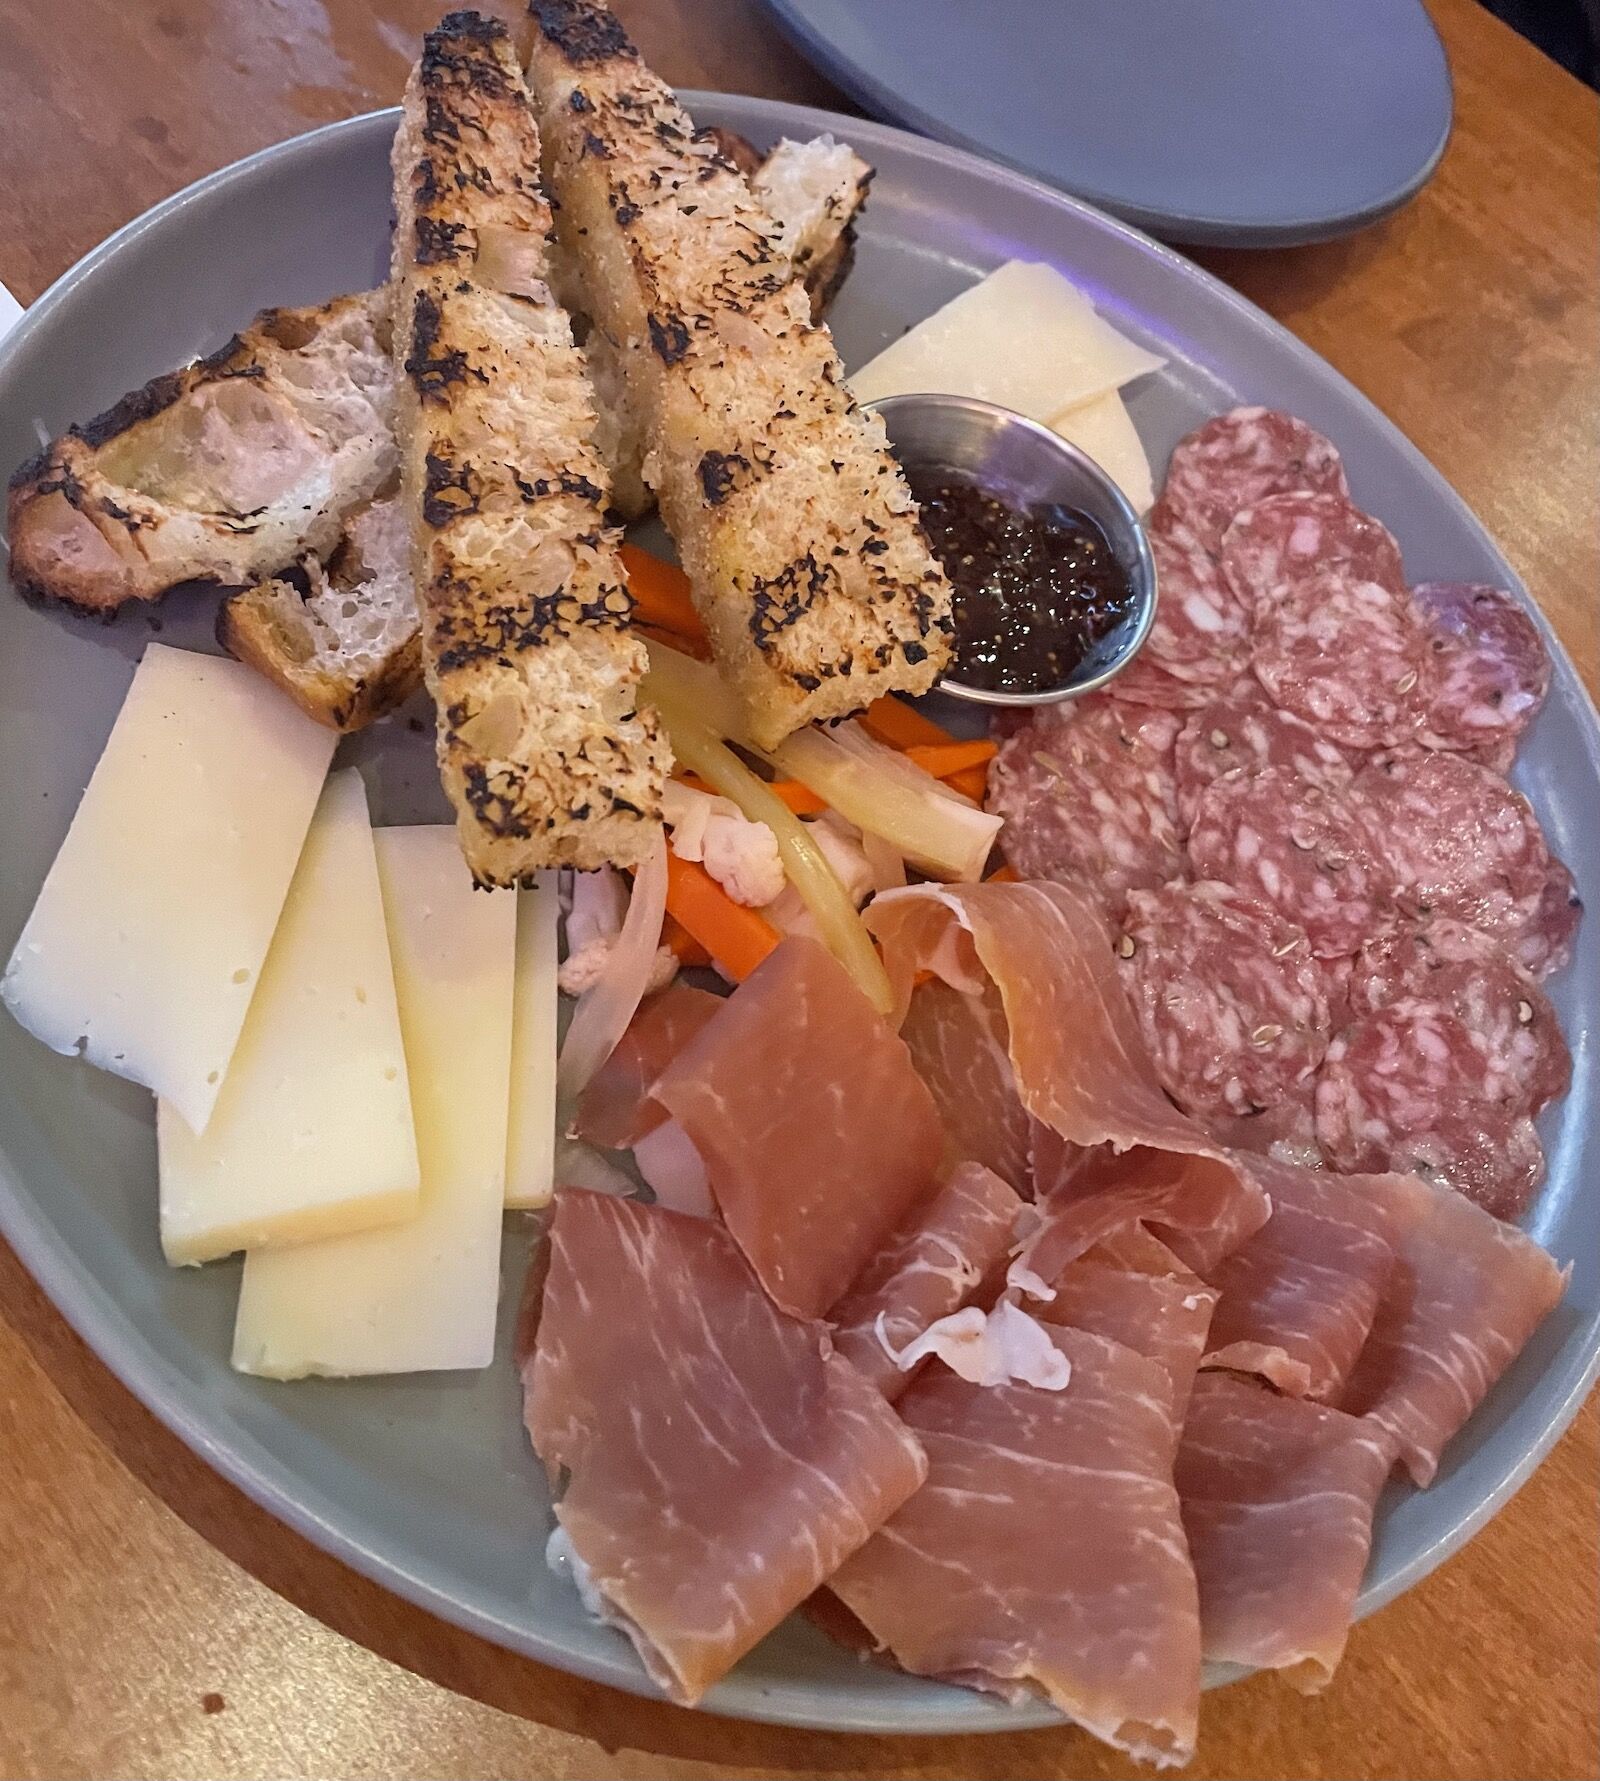 Here is a Charcuterie board from Sarto, a restaurant to eat in Providence in winter